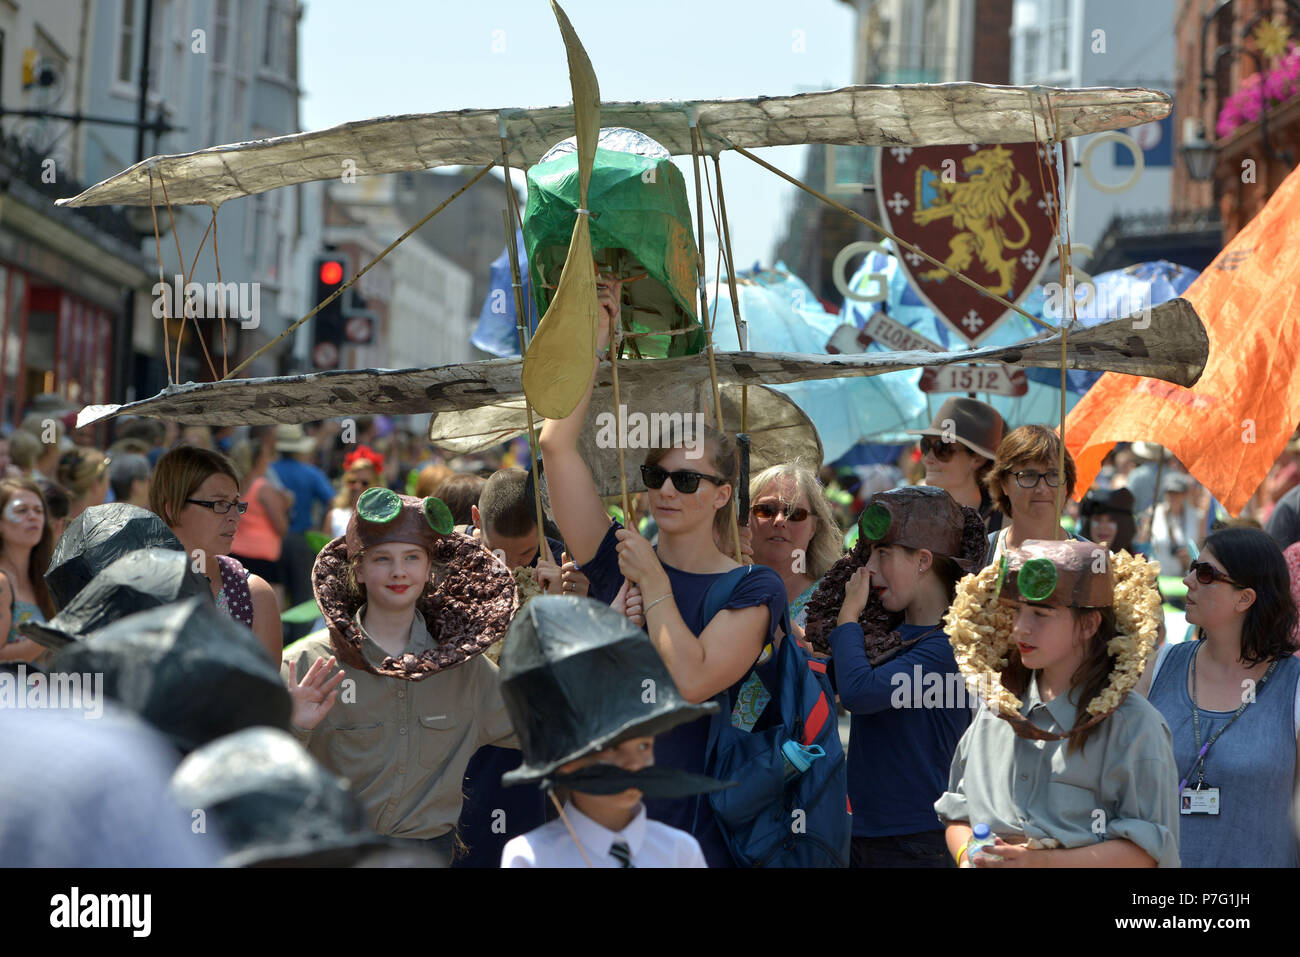 Lewes, East Sussex. 6th July 2018. Hundreds of children from several primary schools across the region come together to celebrate 'moving on' from primary school in a colourful street parade in  Lewes.Peter Cripps/Alamy Live News Stock Photo